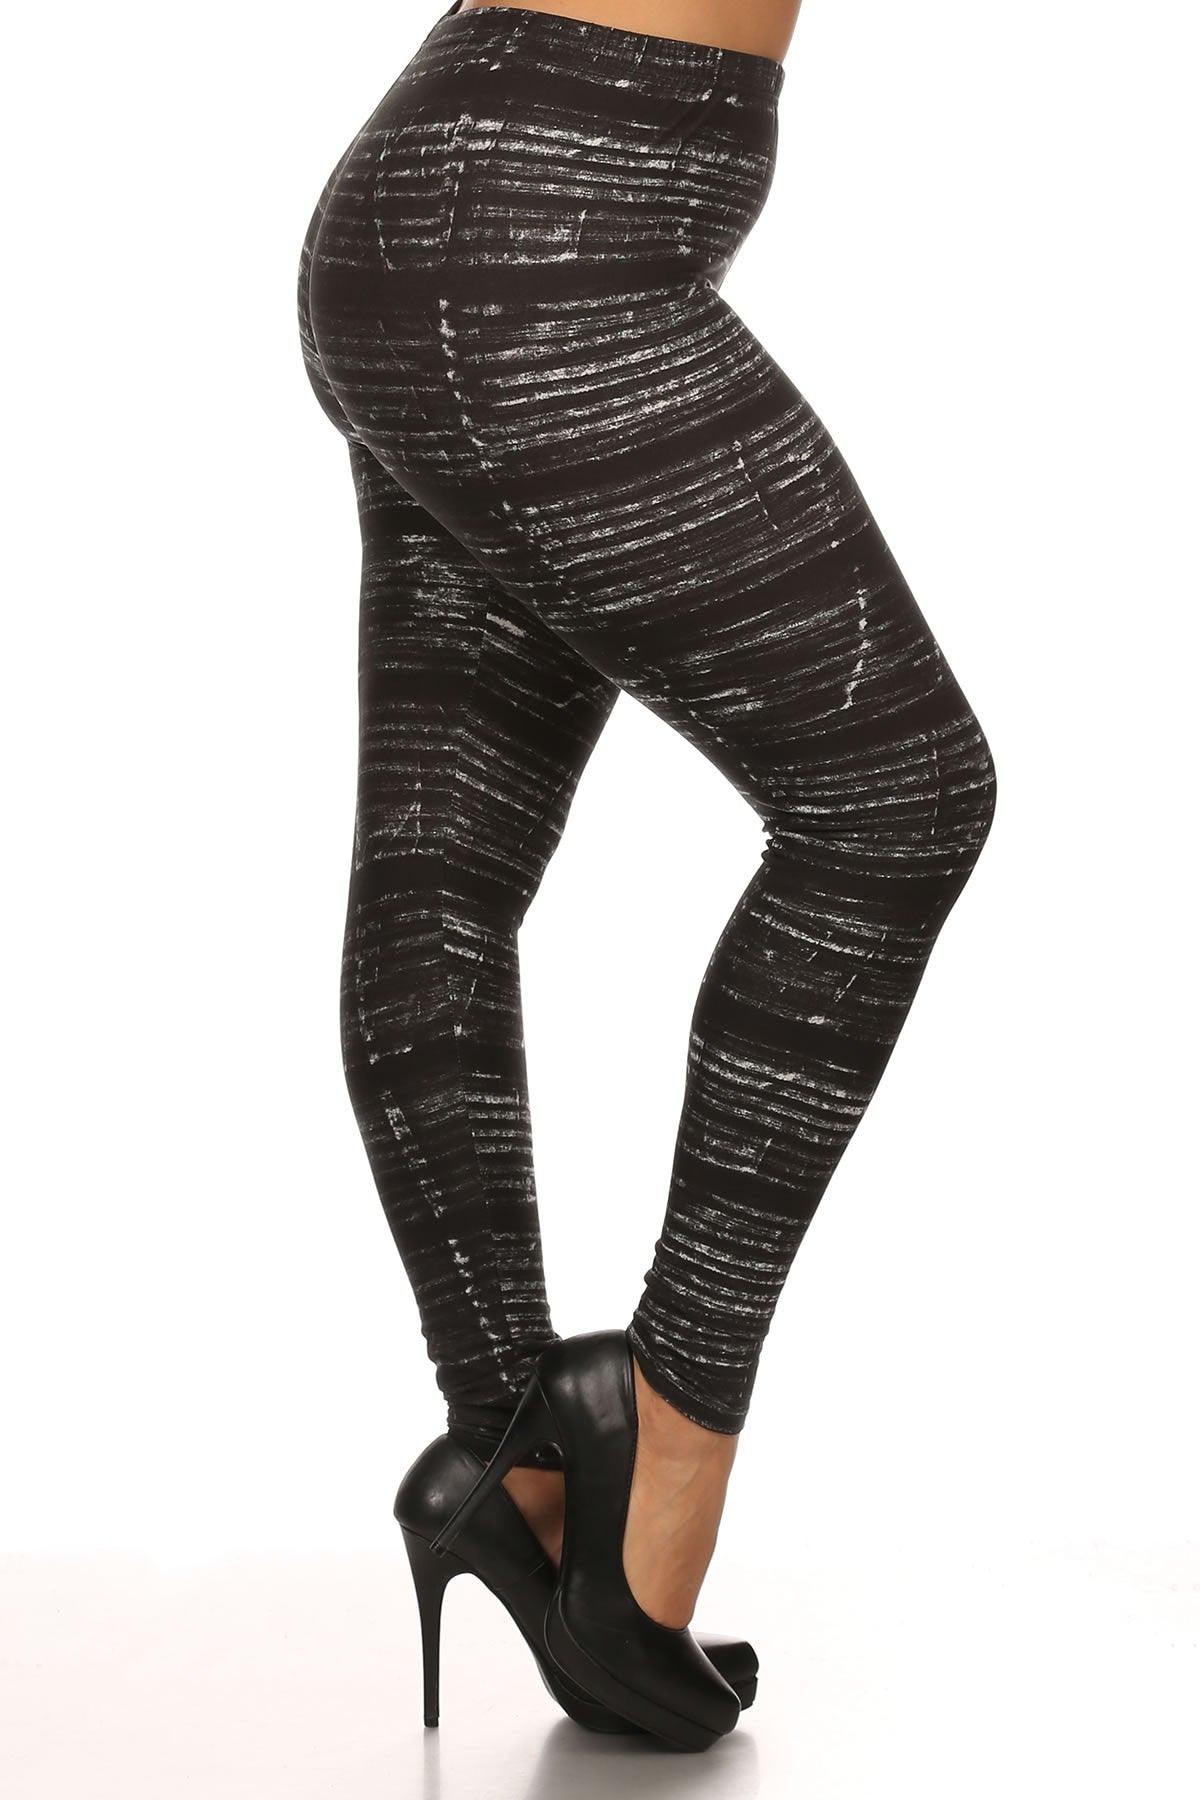 Plus Size Tie Dye Print, Full Length Leggings In A Fitted Style With A Banded High Waist. - Kreative Passions